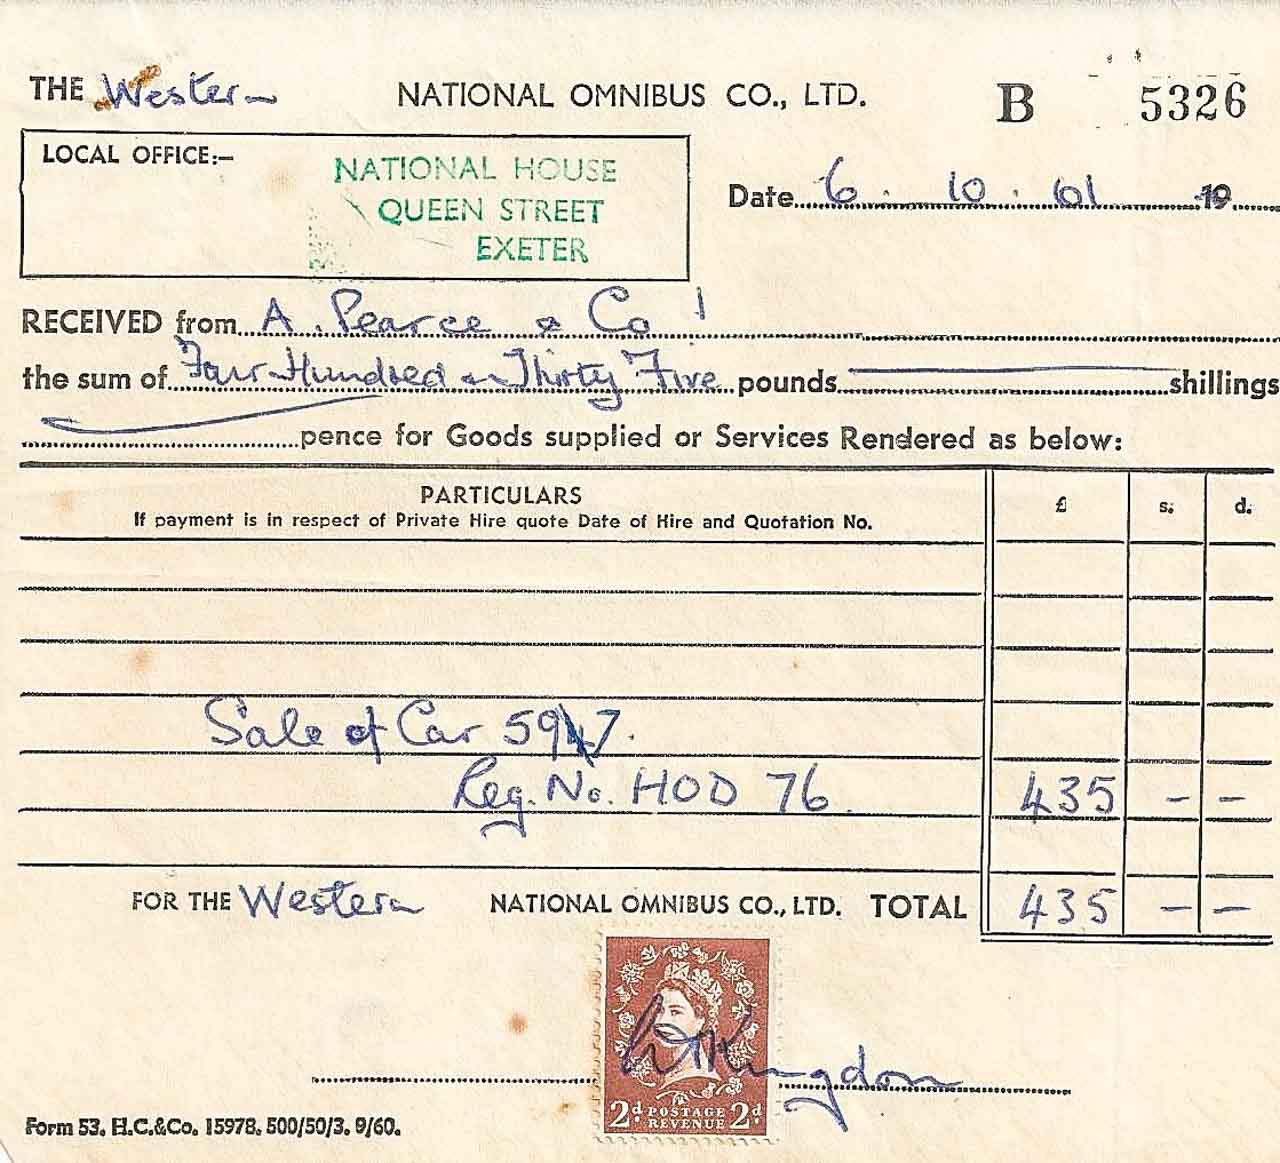 The receipt for the purchase of HOD 76 in Oct 1961